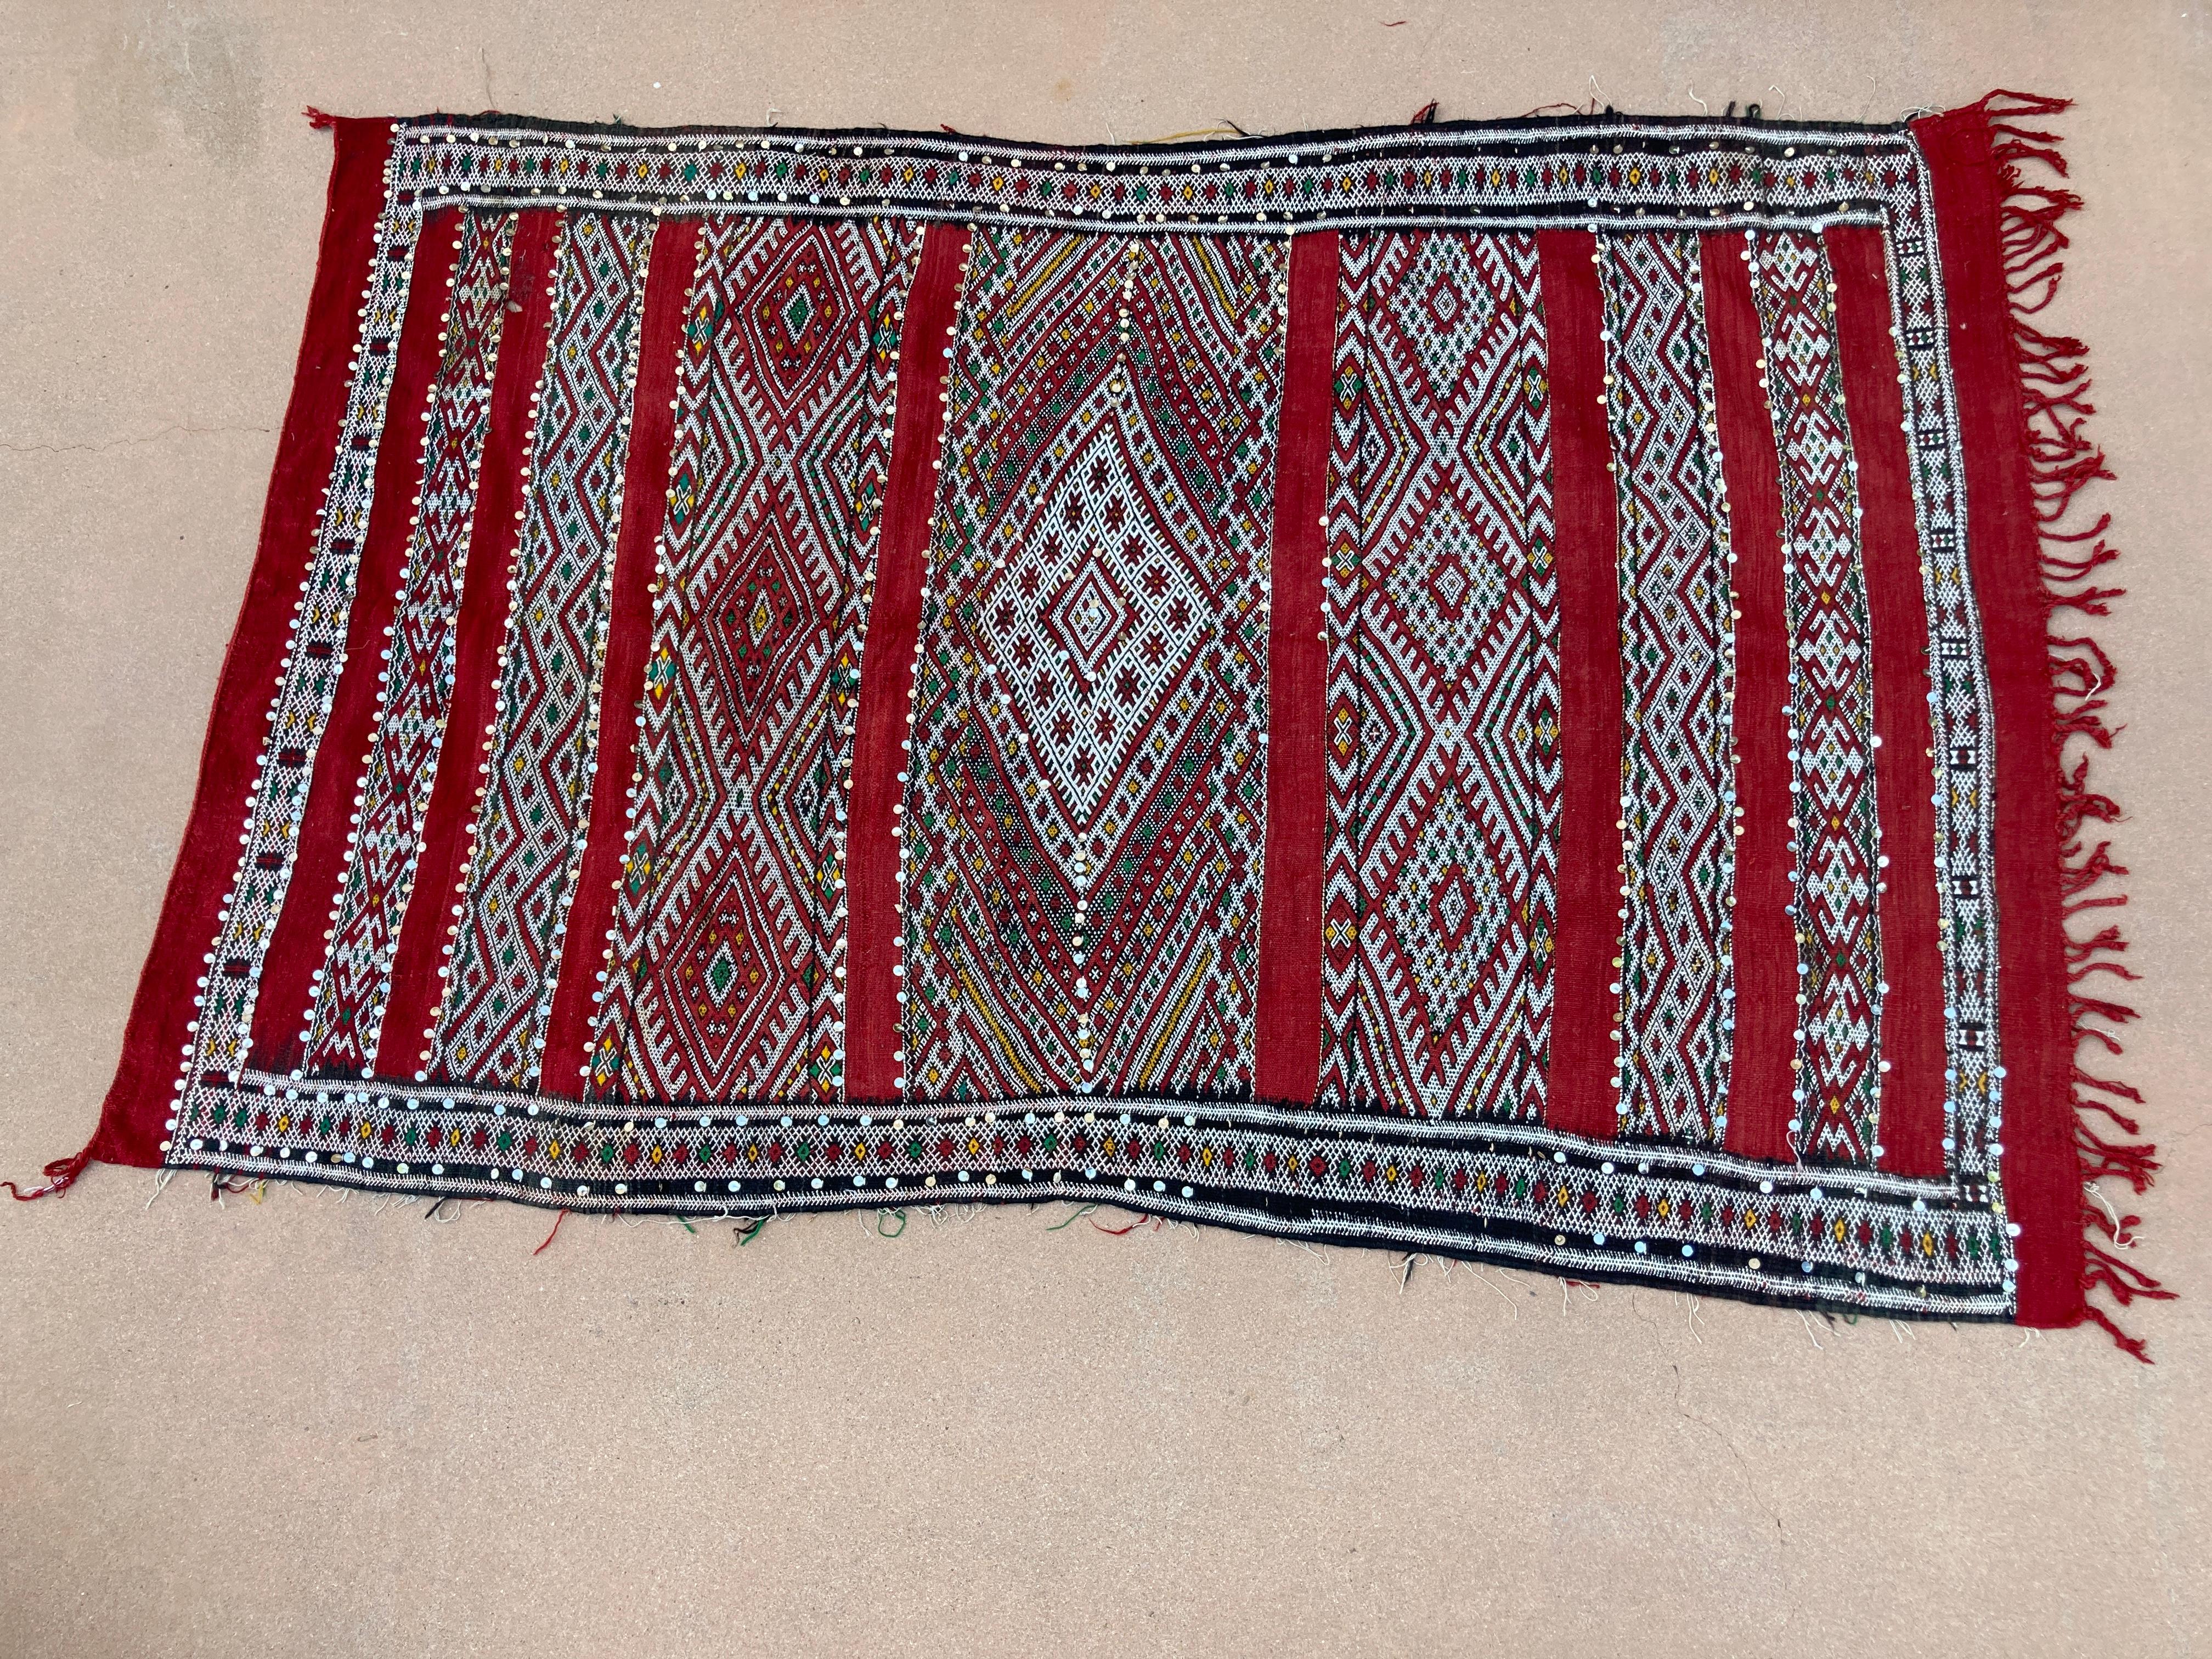 Hand-Woven 1960s Authentic Moroccan Ethnic Rug with Sequins North Africa, Handira For Sale